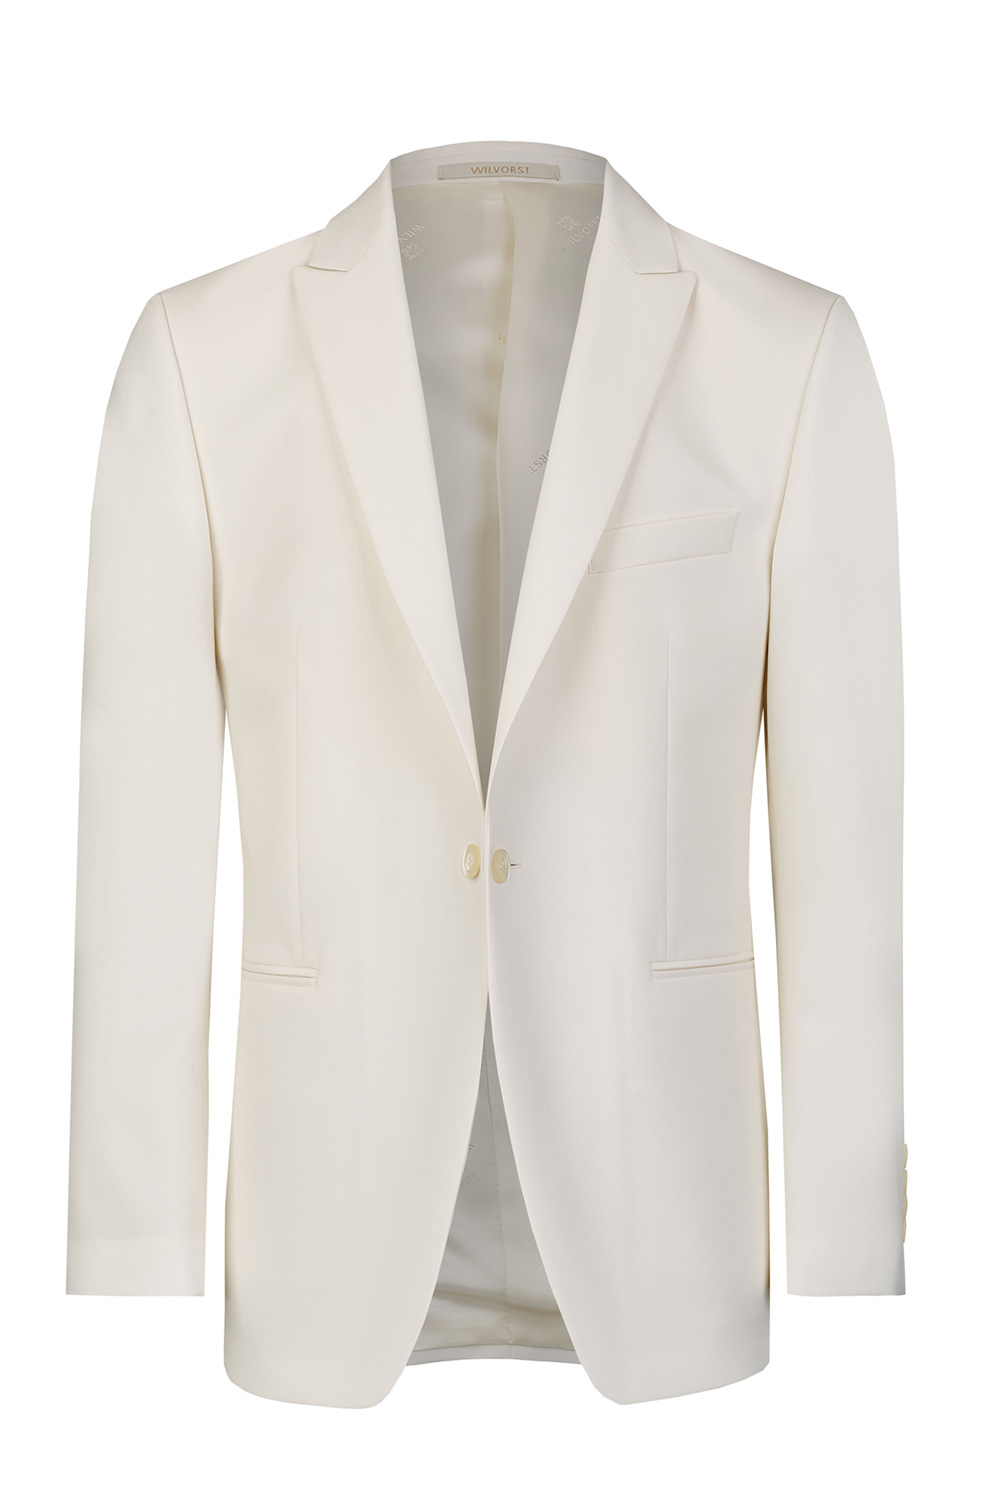 White Dinner Jacket with Side Vents - Tom Murphy's Formal and Menswear